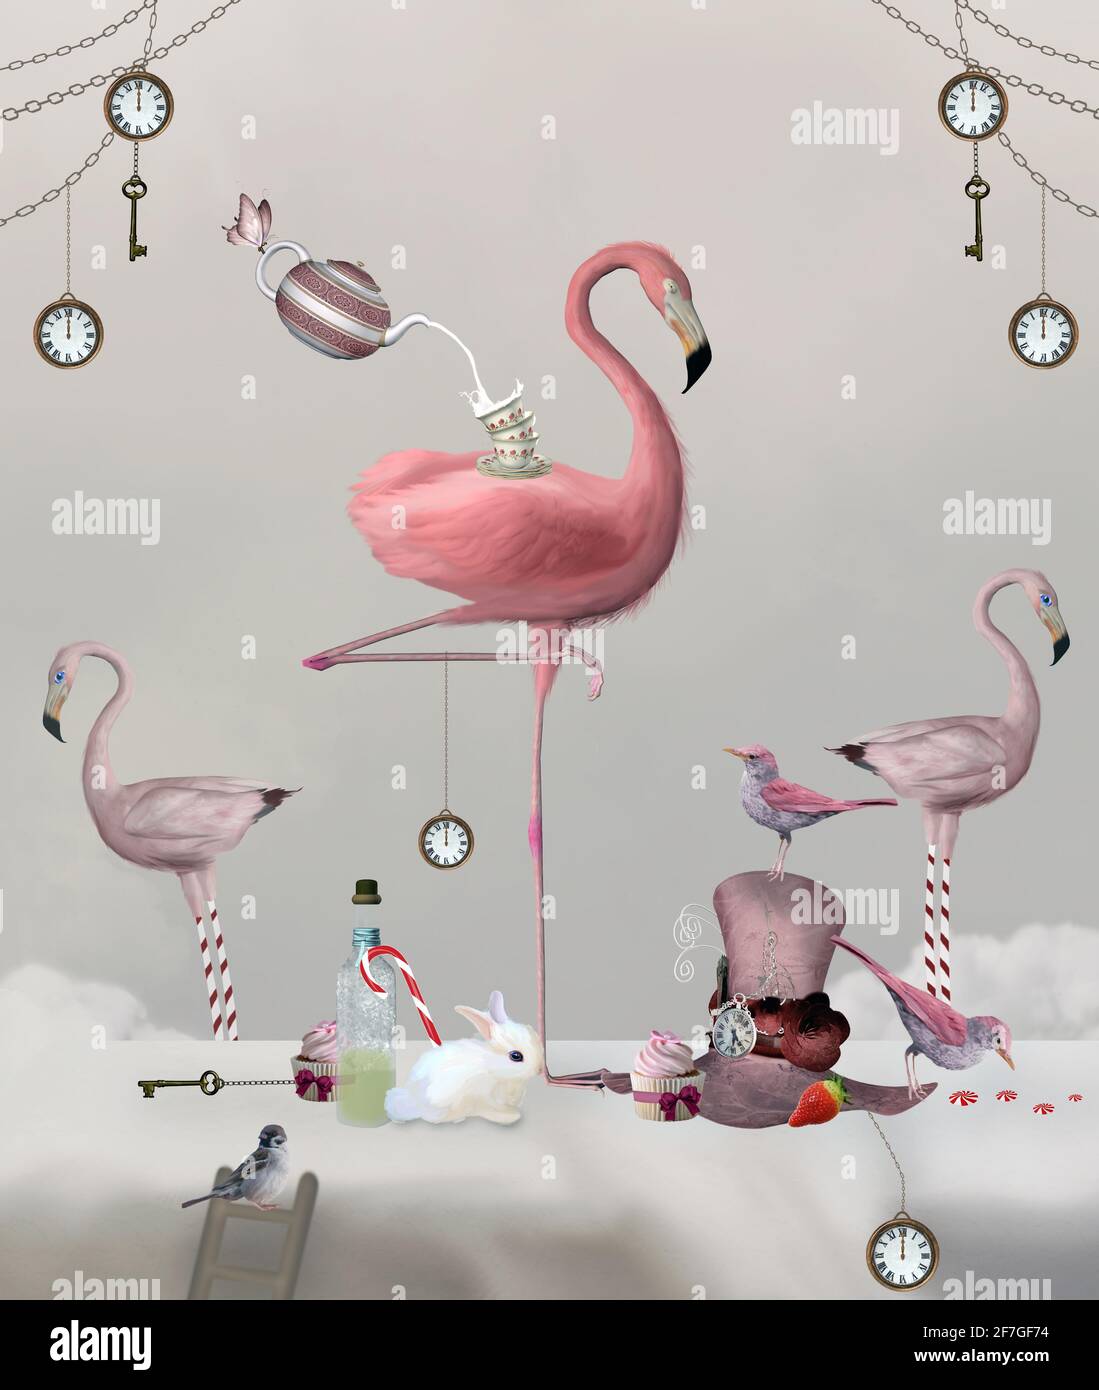 Surreal tea party with a pink flamingo on a table with clocks, keys and sweetness Stock Photo